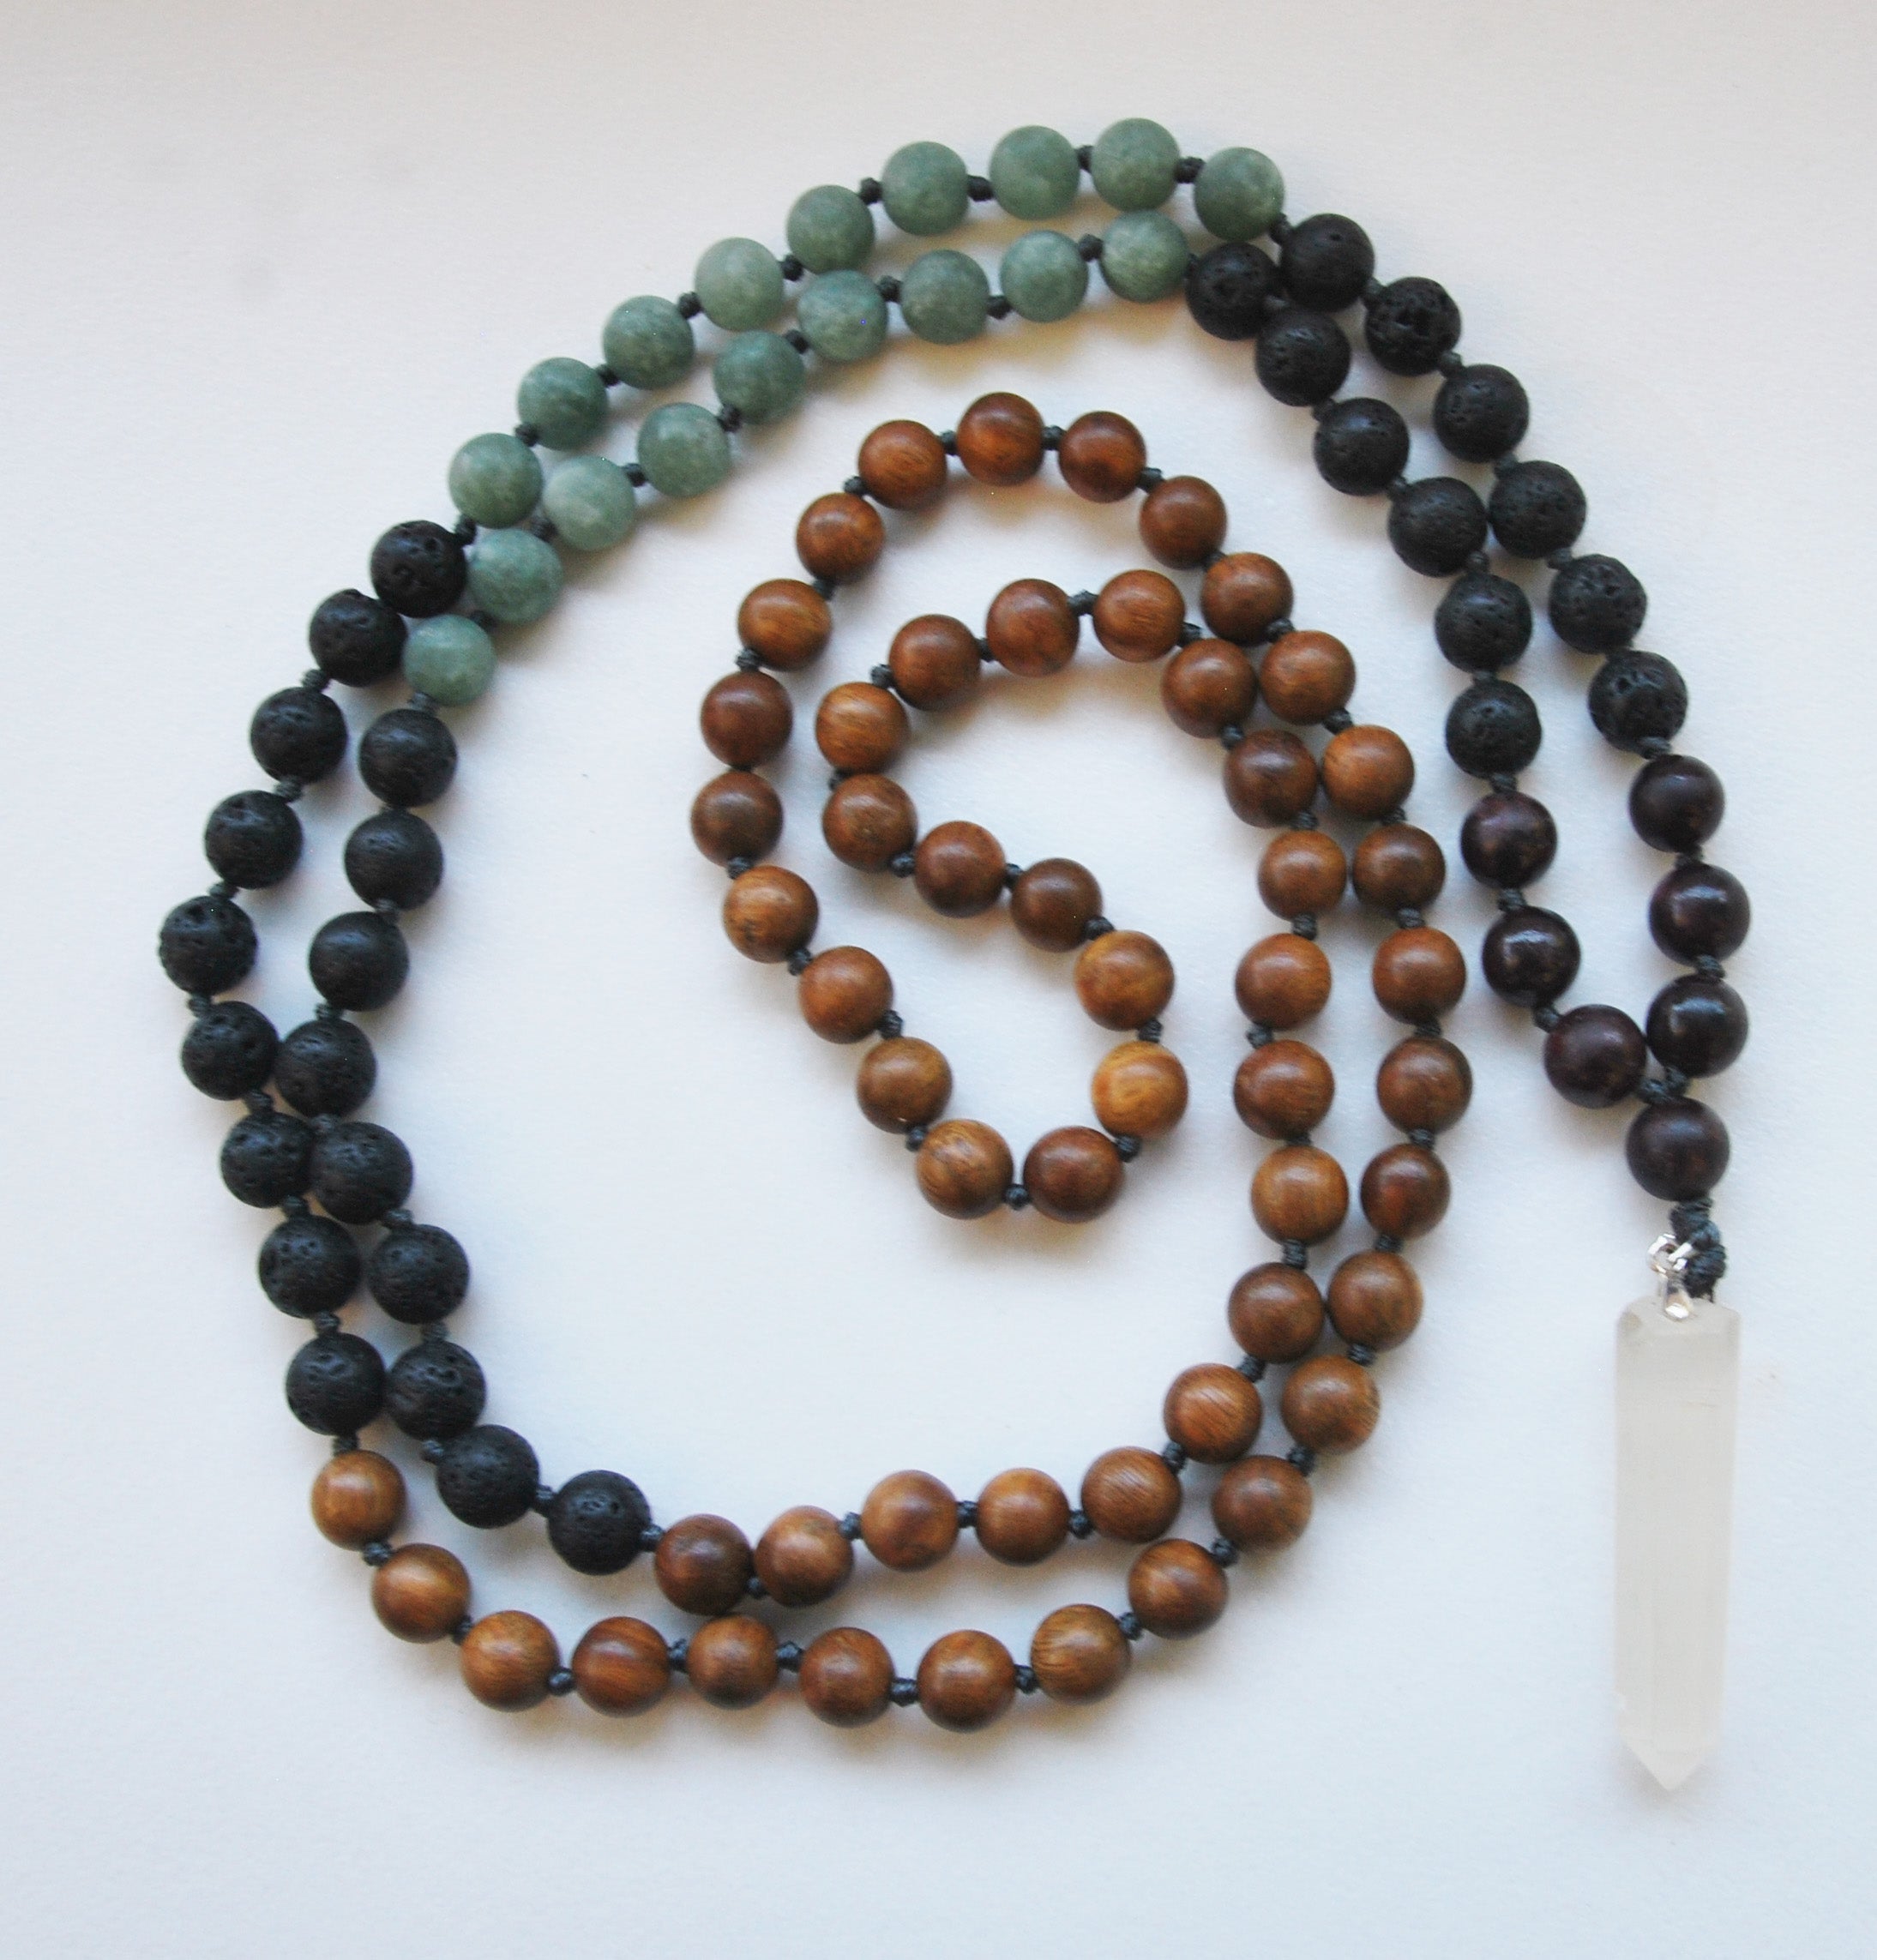 8mm Green Sandalwood & Matte Jade 108 Knotted Mala Necklace with Crystal Pendant